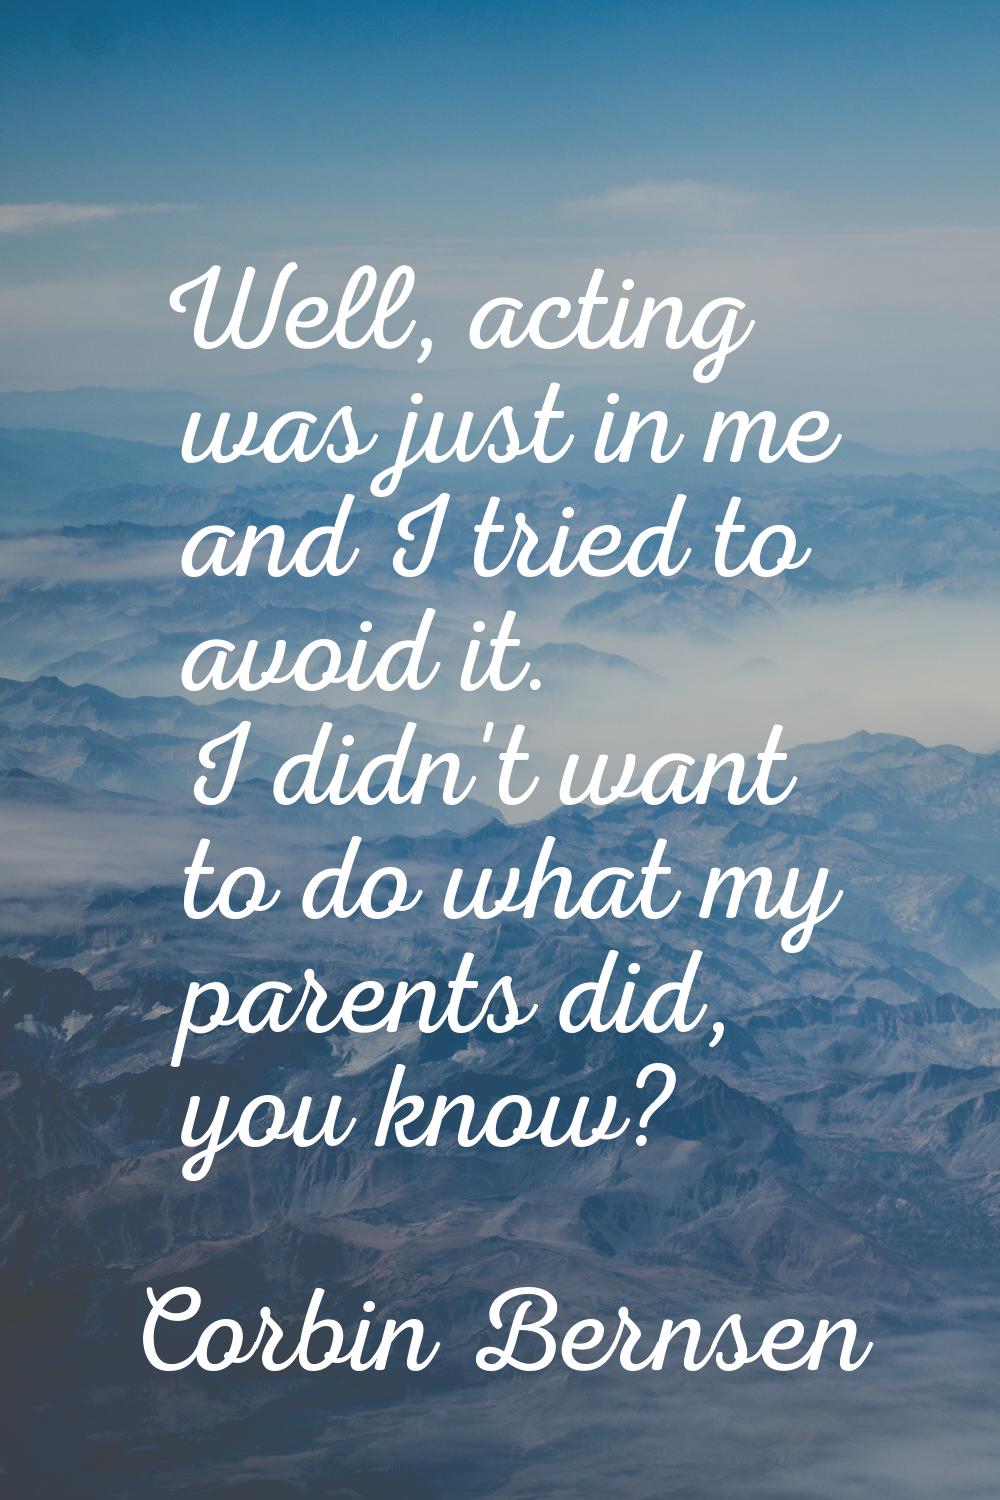 Well, acting was just in me and I tried to avoid it. I didn't want to do what my parents did, you k